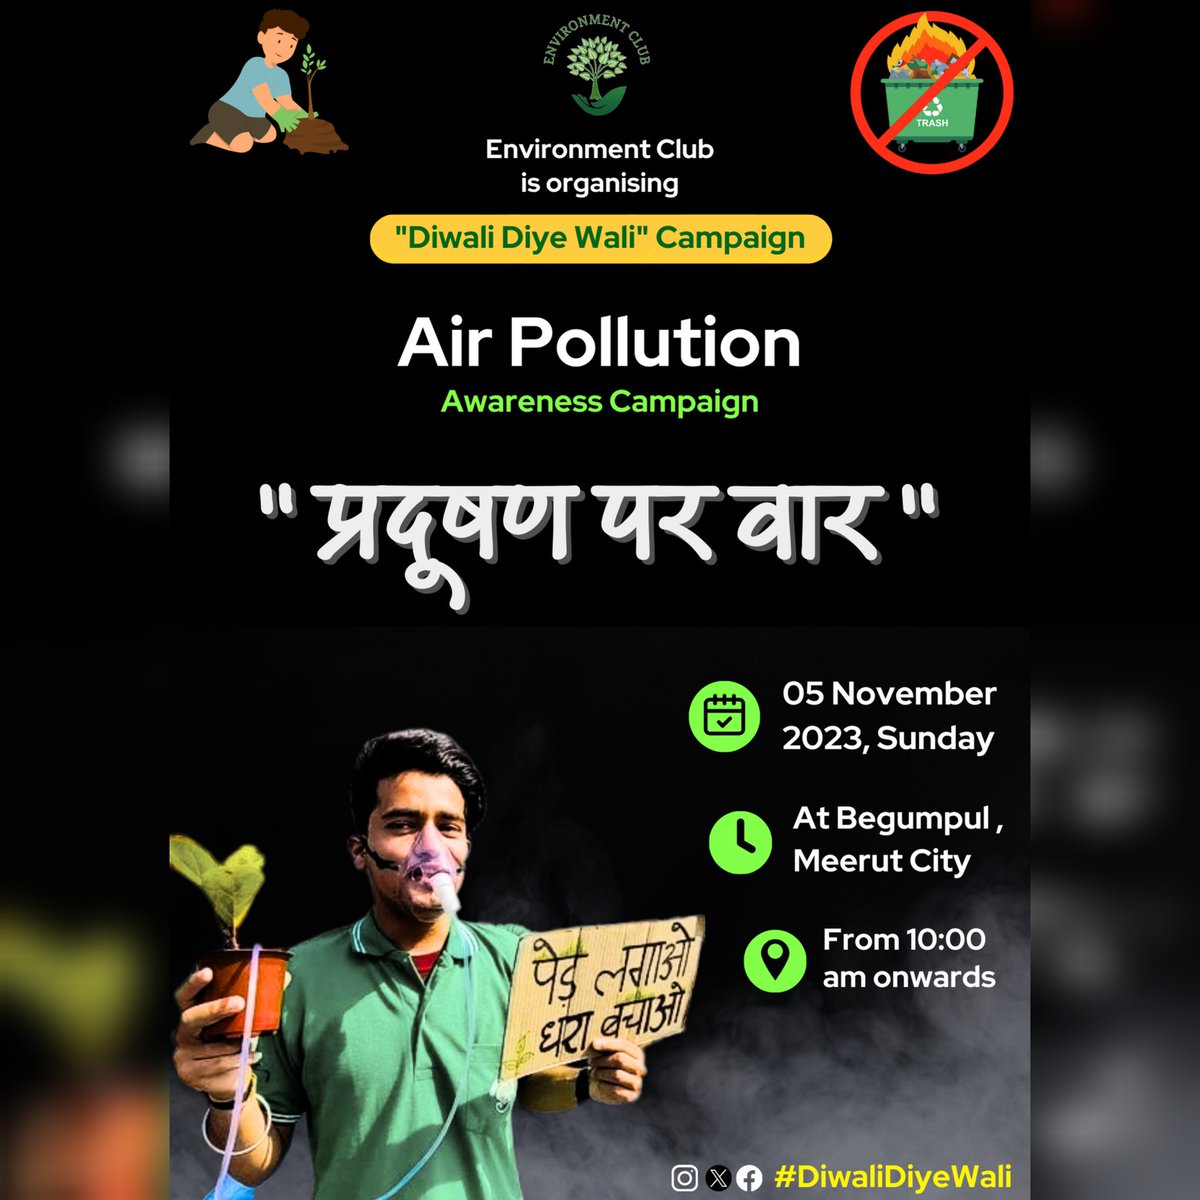 Join us in #PradushanParVar Awareness Event on emerging crises #AirPollution under our #DiwaliDiyeWali Campaign...
@CPCB_OFFICIAL @MeerutForest 
#BeatAirPollution #Smog